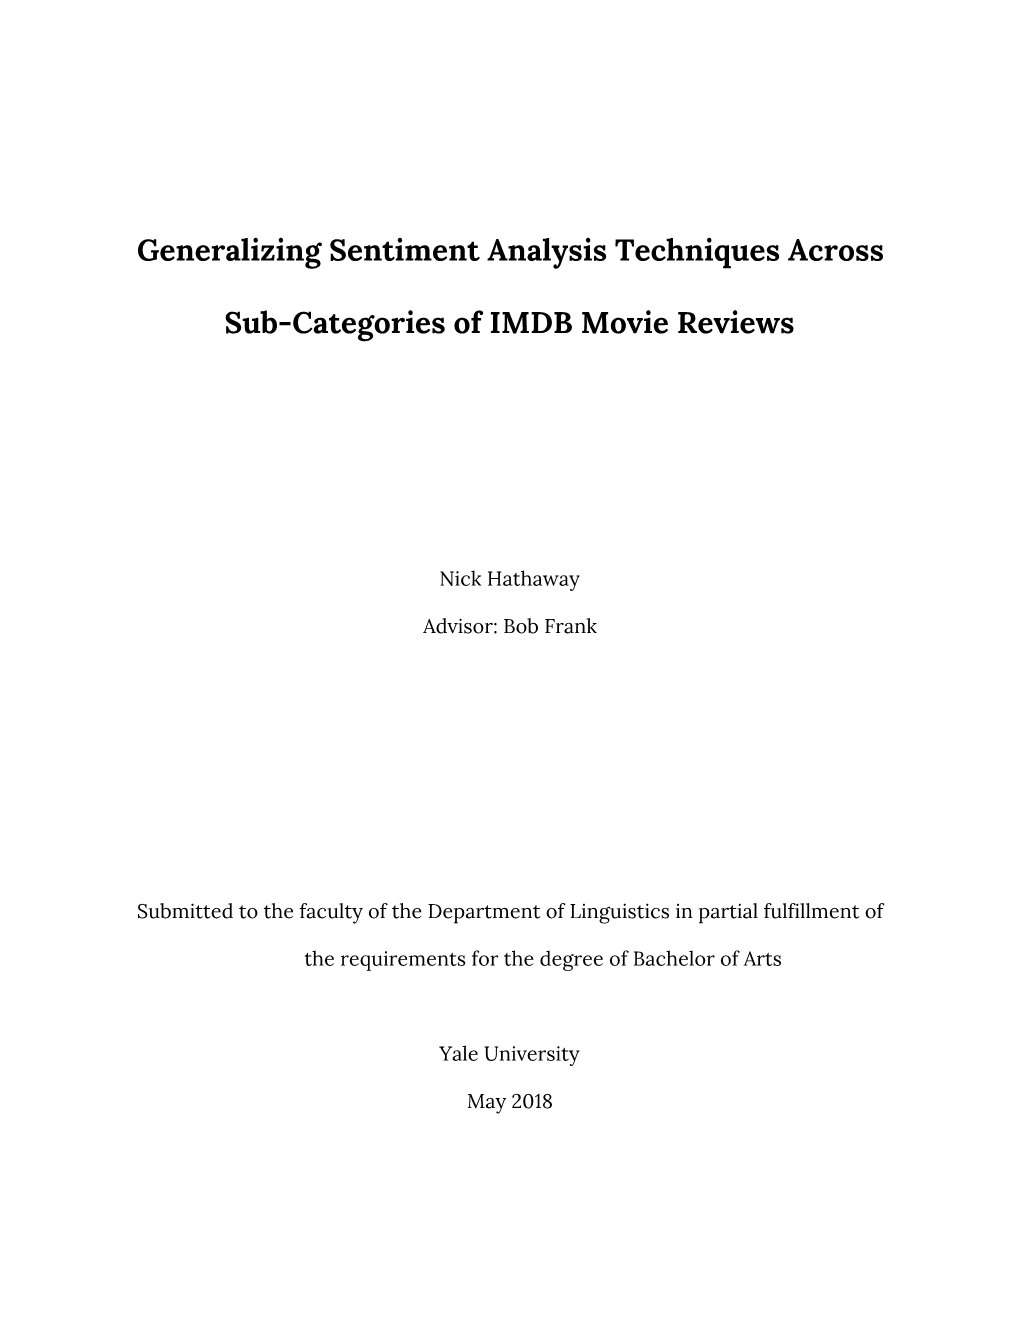 Generalizing Sentiment Analysis Techniques Across Sub-Categories of IMDB Movie Reviews